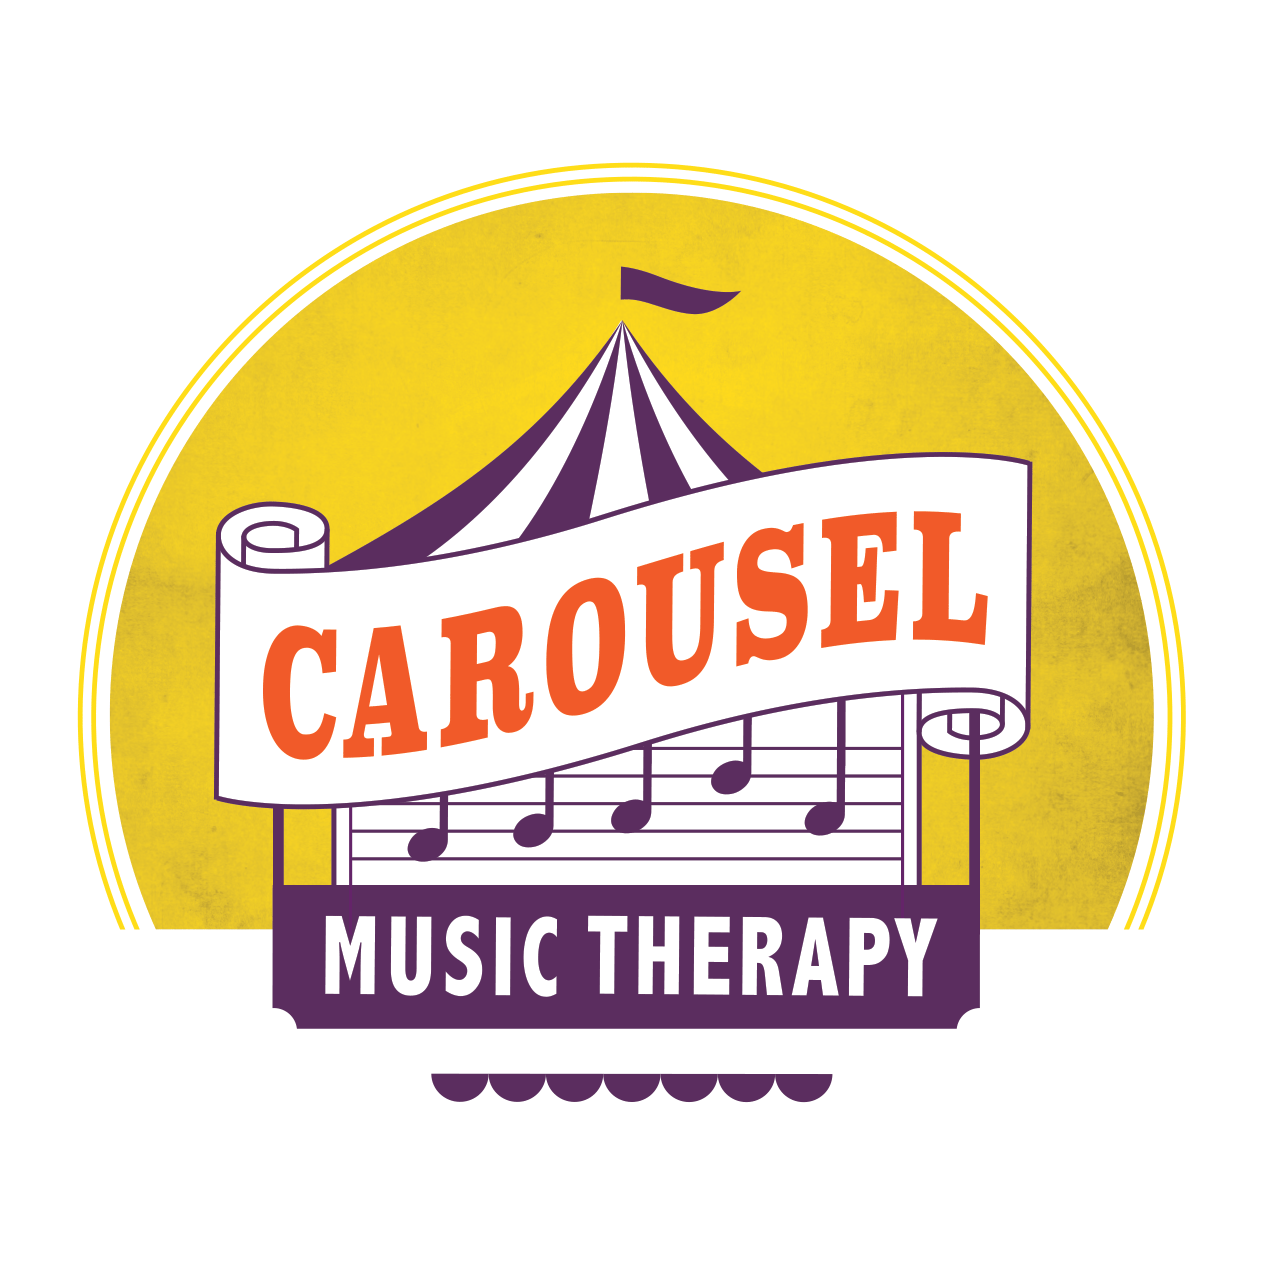 Carousel Music Therapy